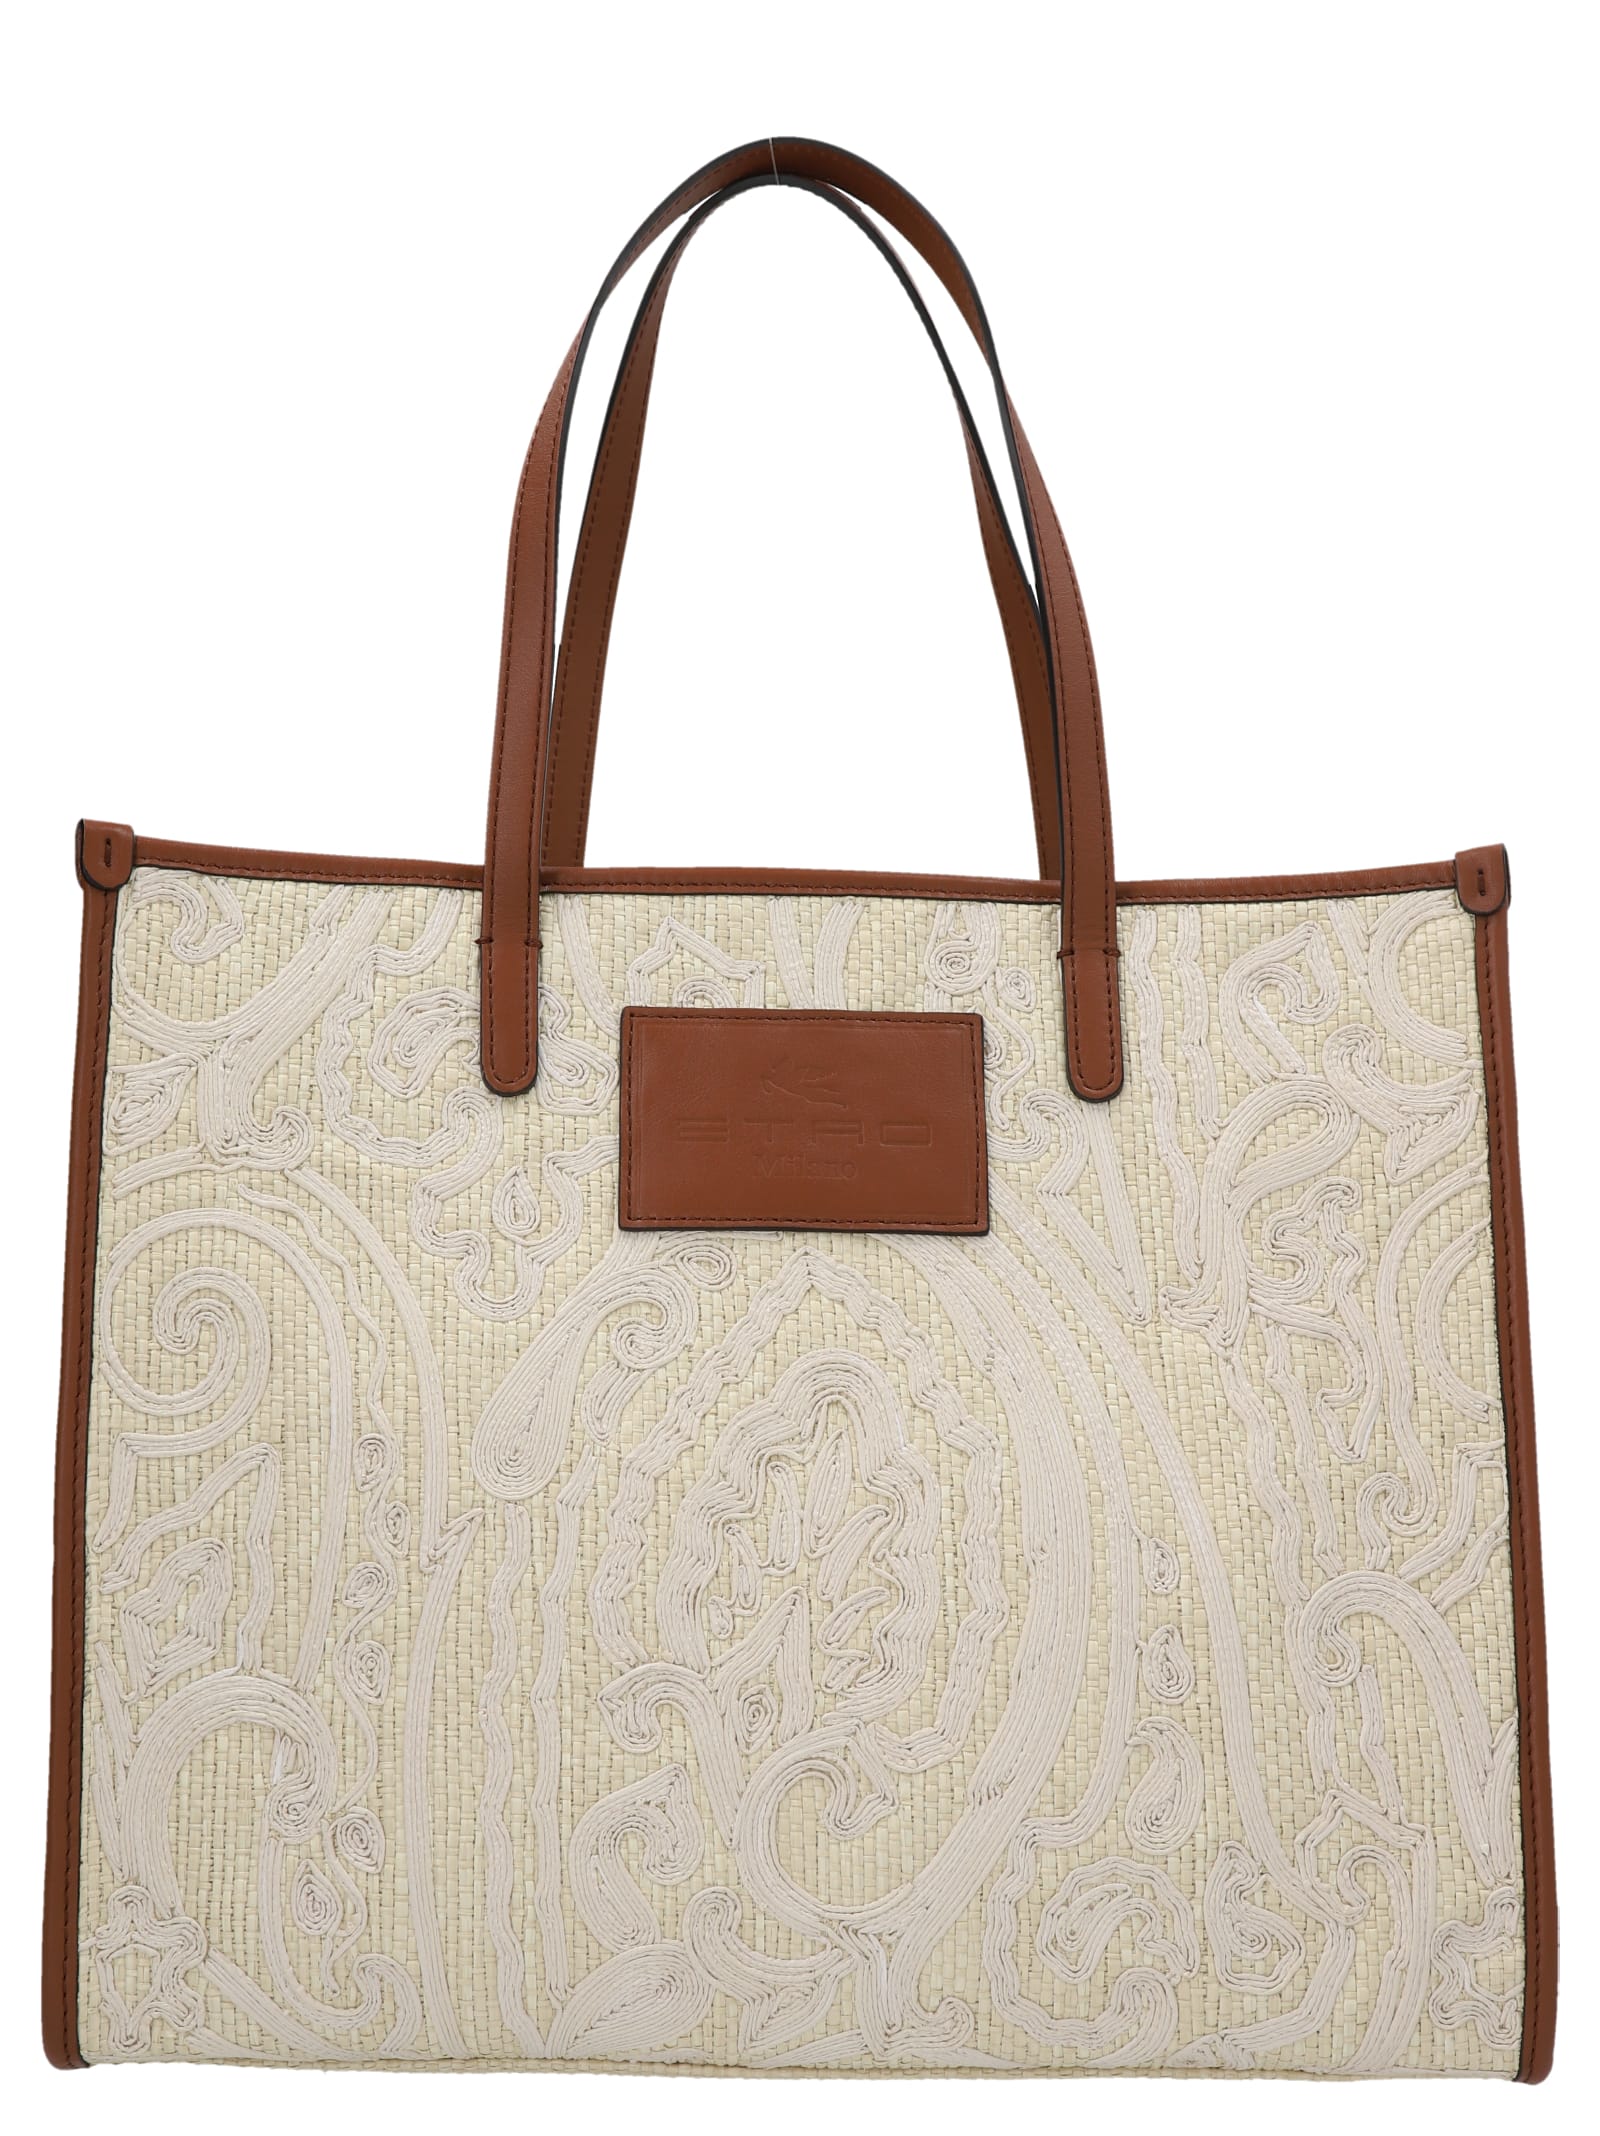 ETRO Globetrotter Pattern Canvas Shopping Tote Bag for Women